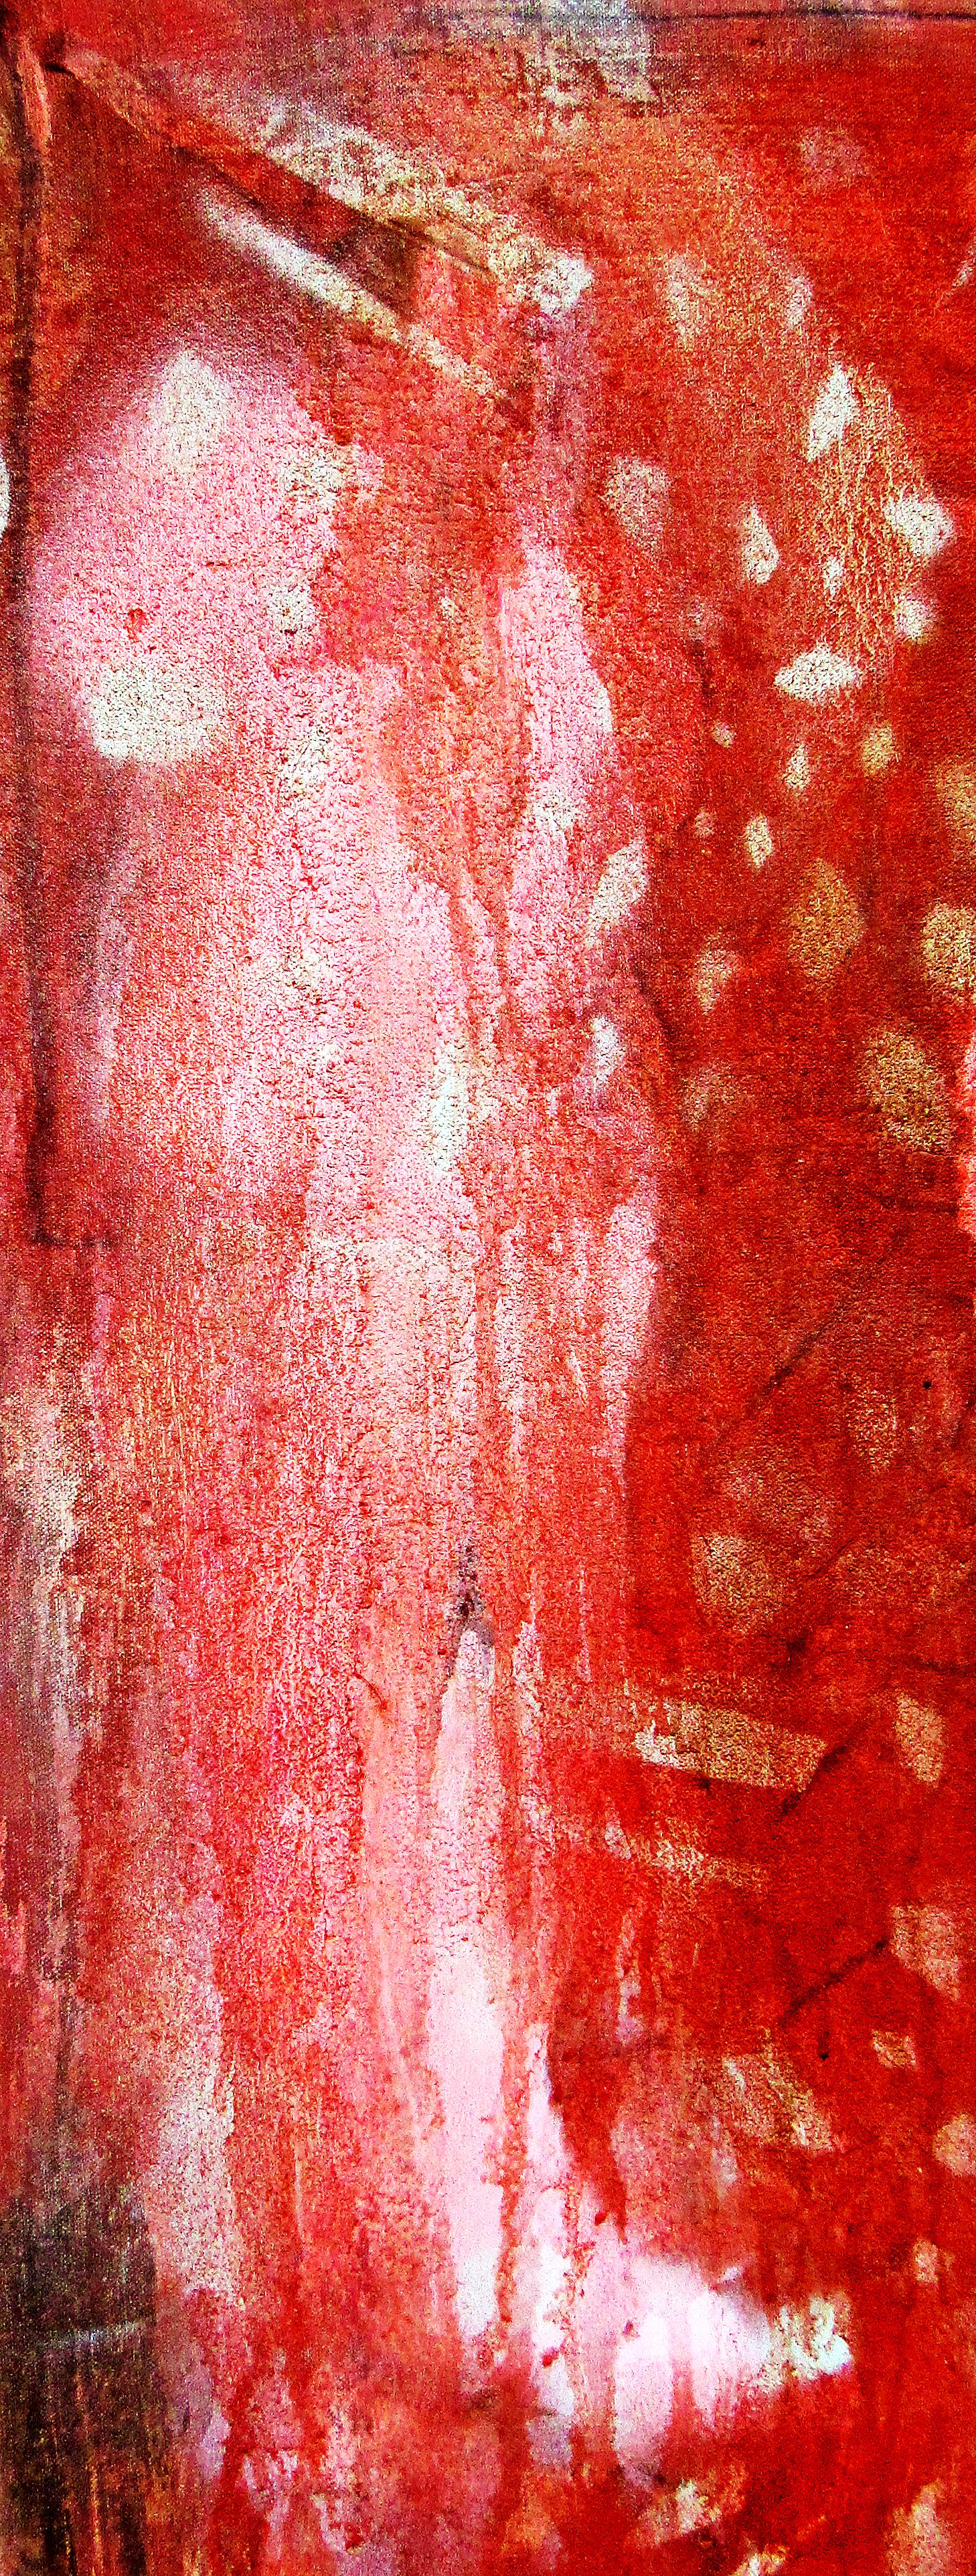 Eurydice, red gestural abstract w figures - Red Figurative Painting by C. Dimitri